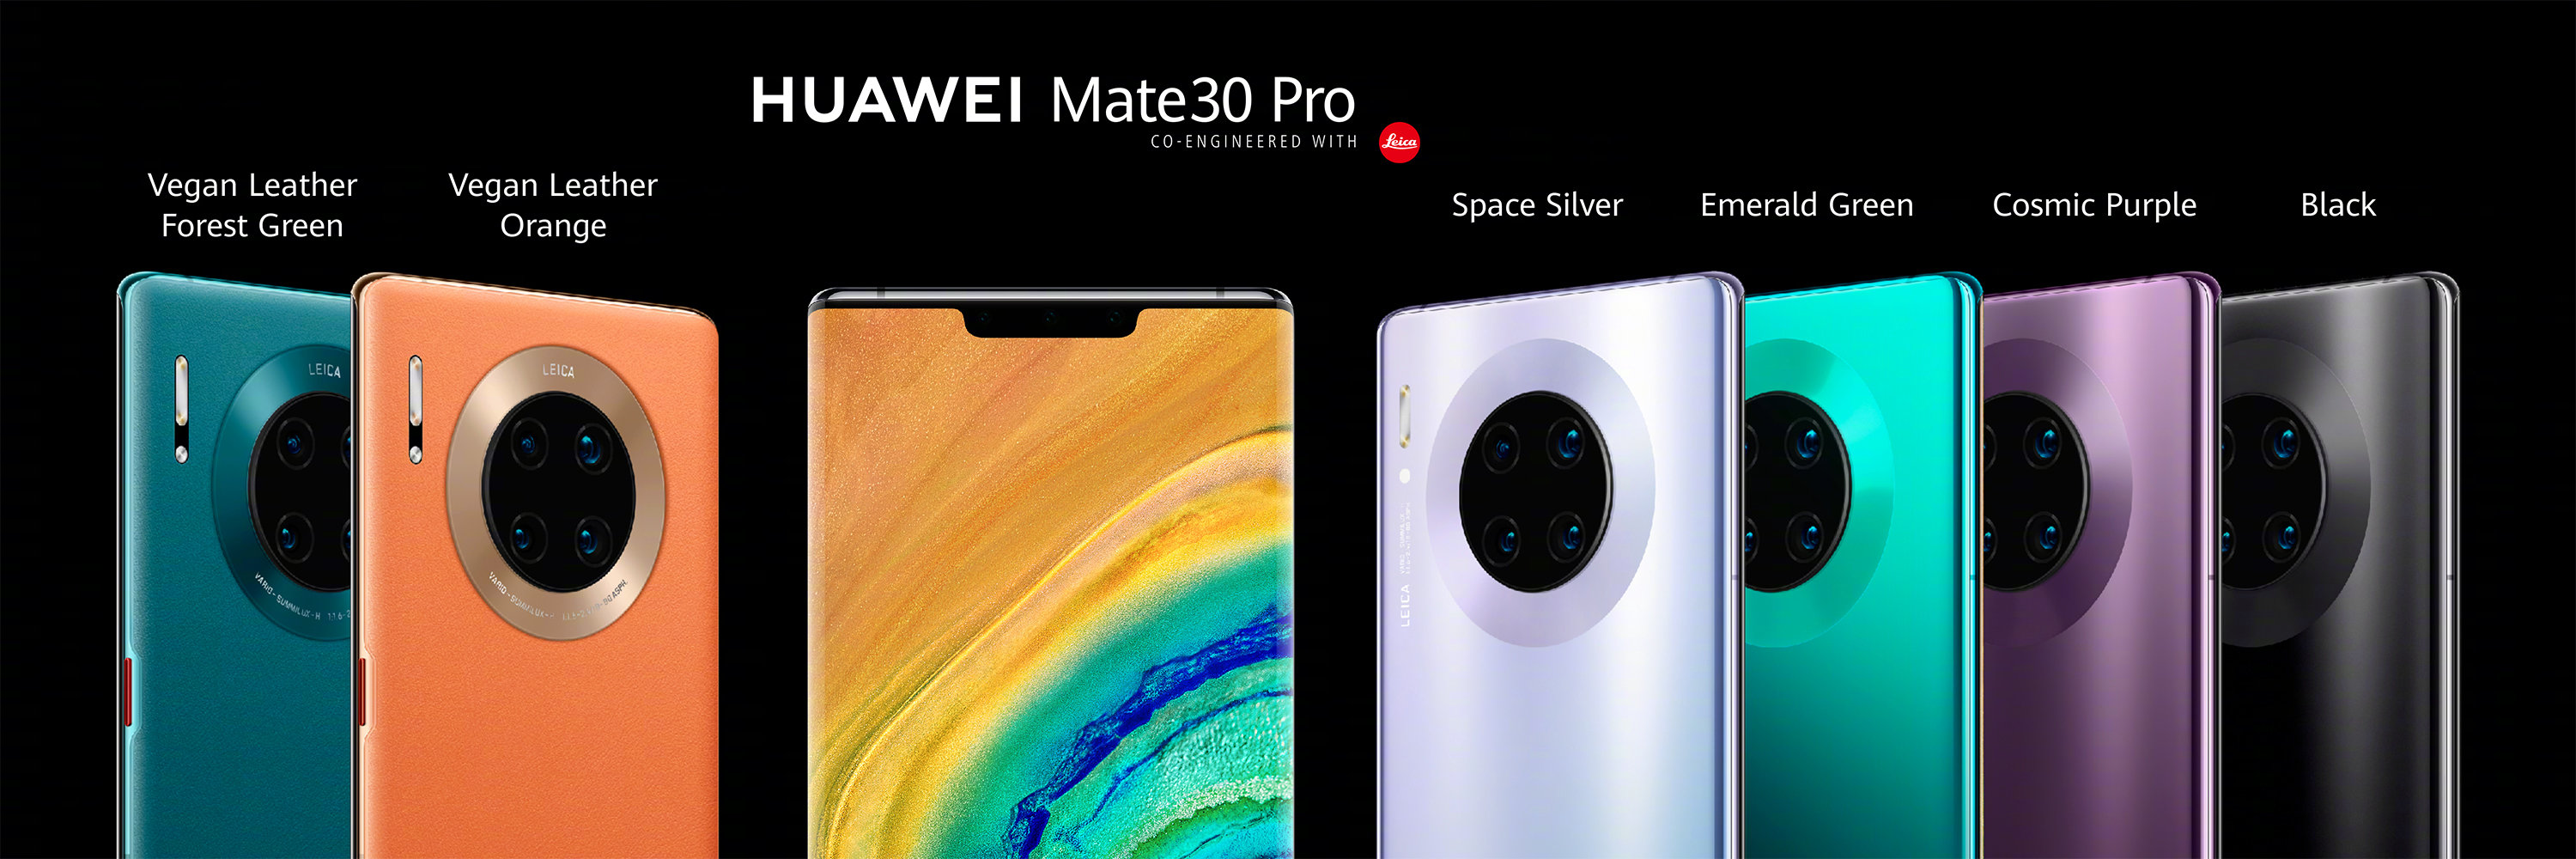 Huawei Mate 30 Pro and Mate 30 Pro (5G): Specifications - Huawei